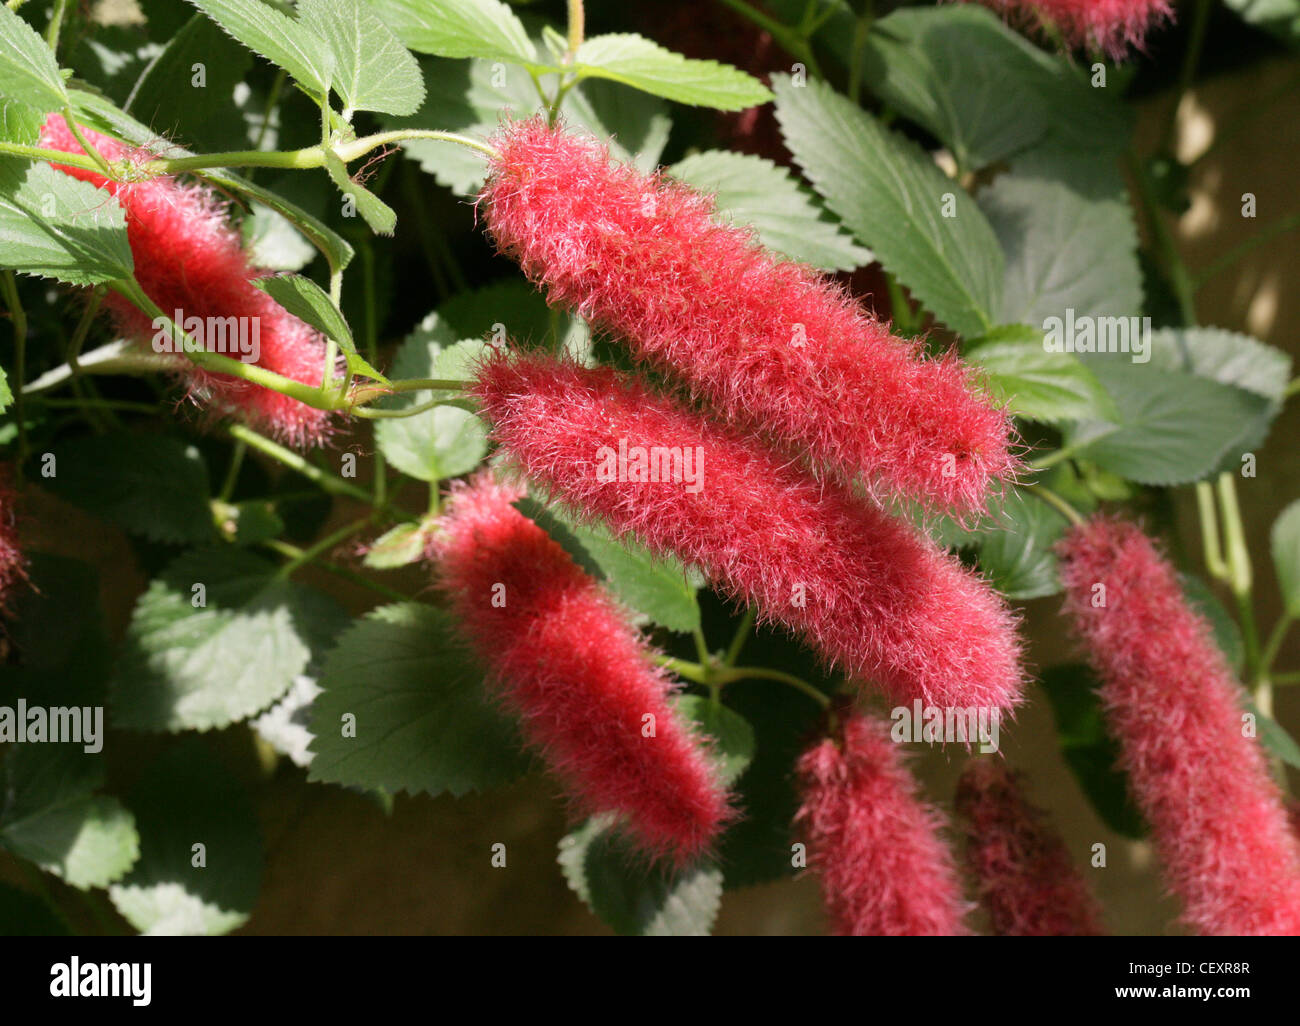 Dwarf or Trailing Chenille Plant, Strawberry Firetails, Red-Hot Cat's Tail, Kitten's Tail, Acalypha pendula, Euphorbiaceae. Stock Photo